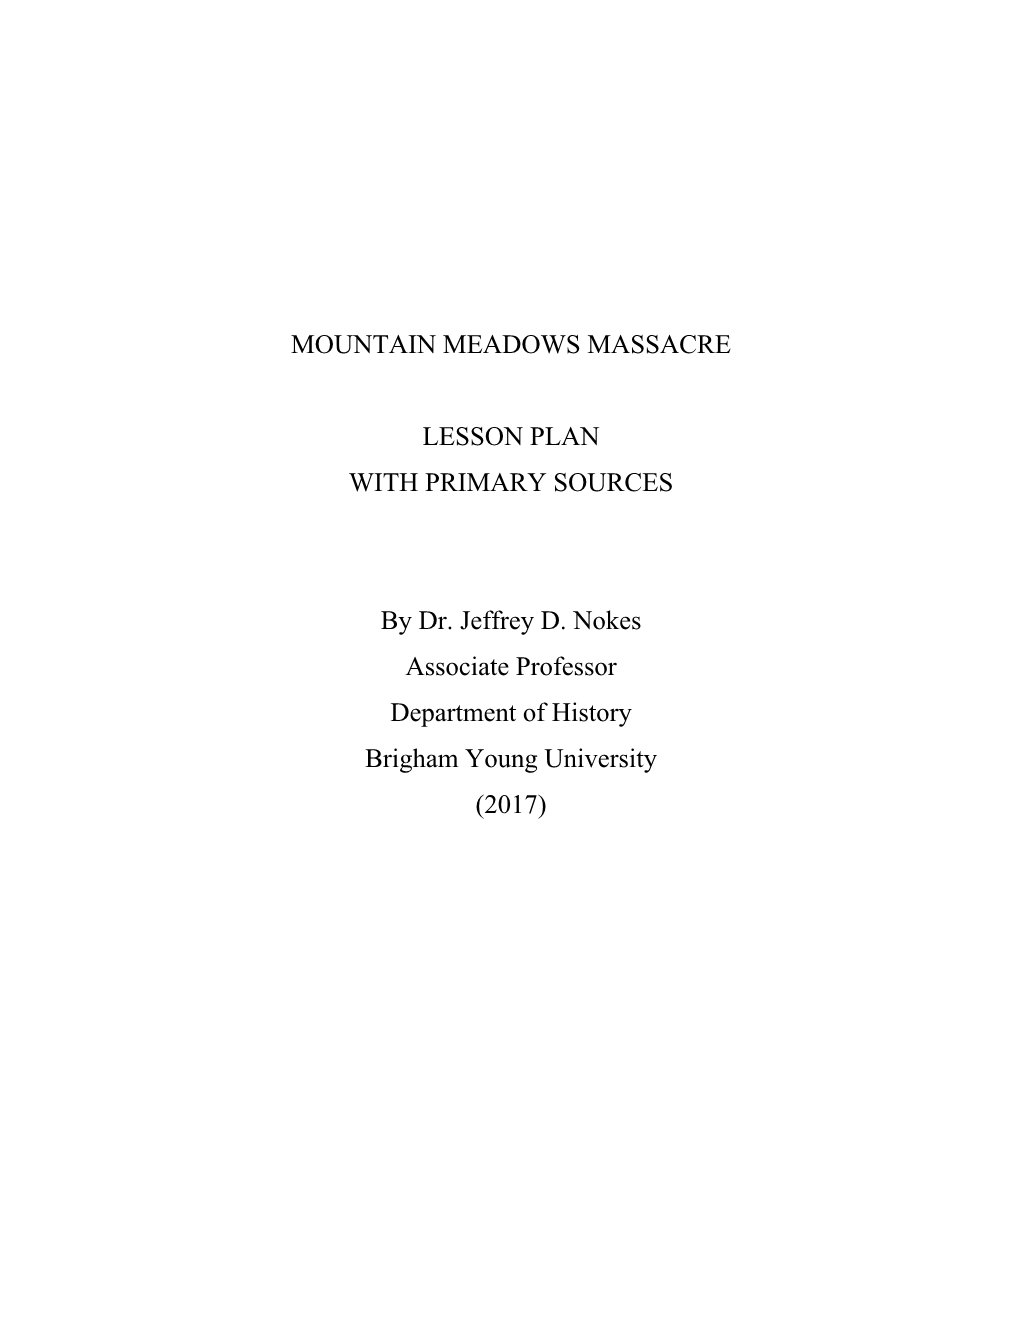 Mountain Meadows Massacre Lesson Plan with Primary